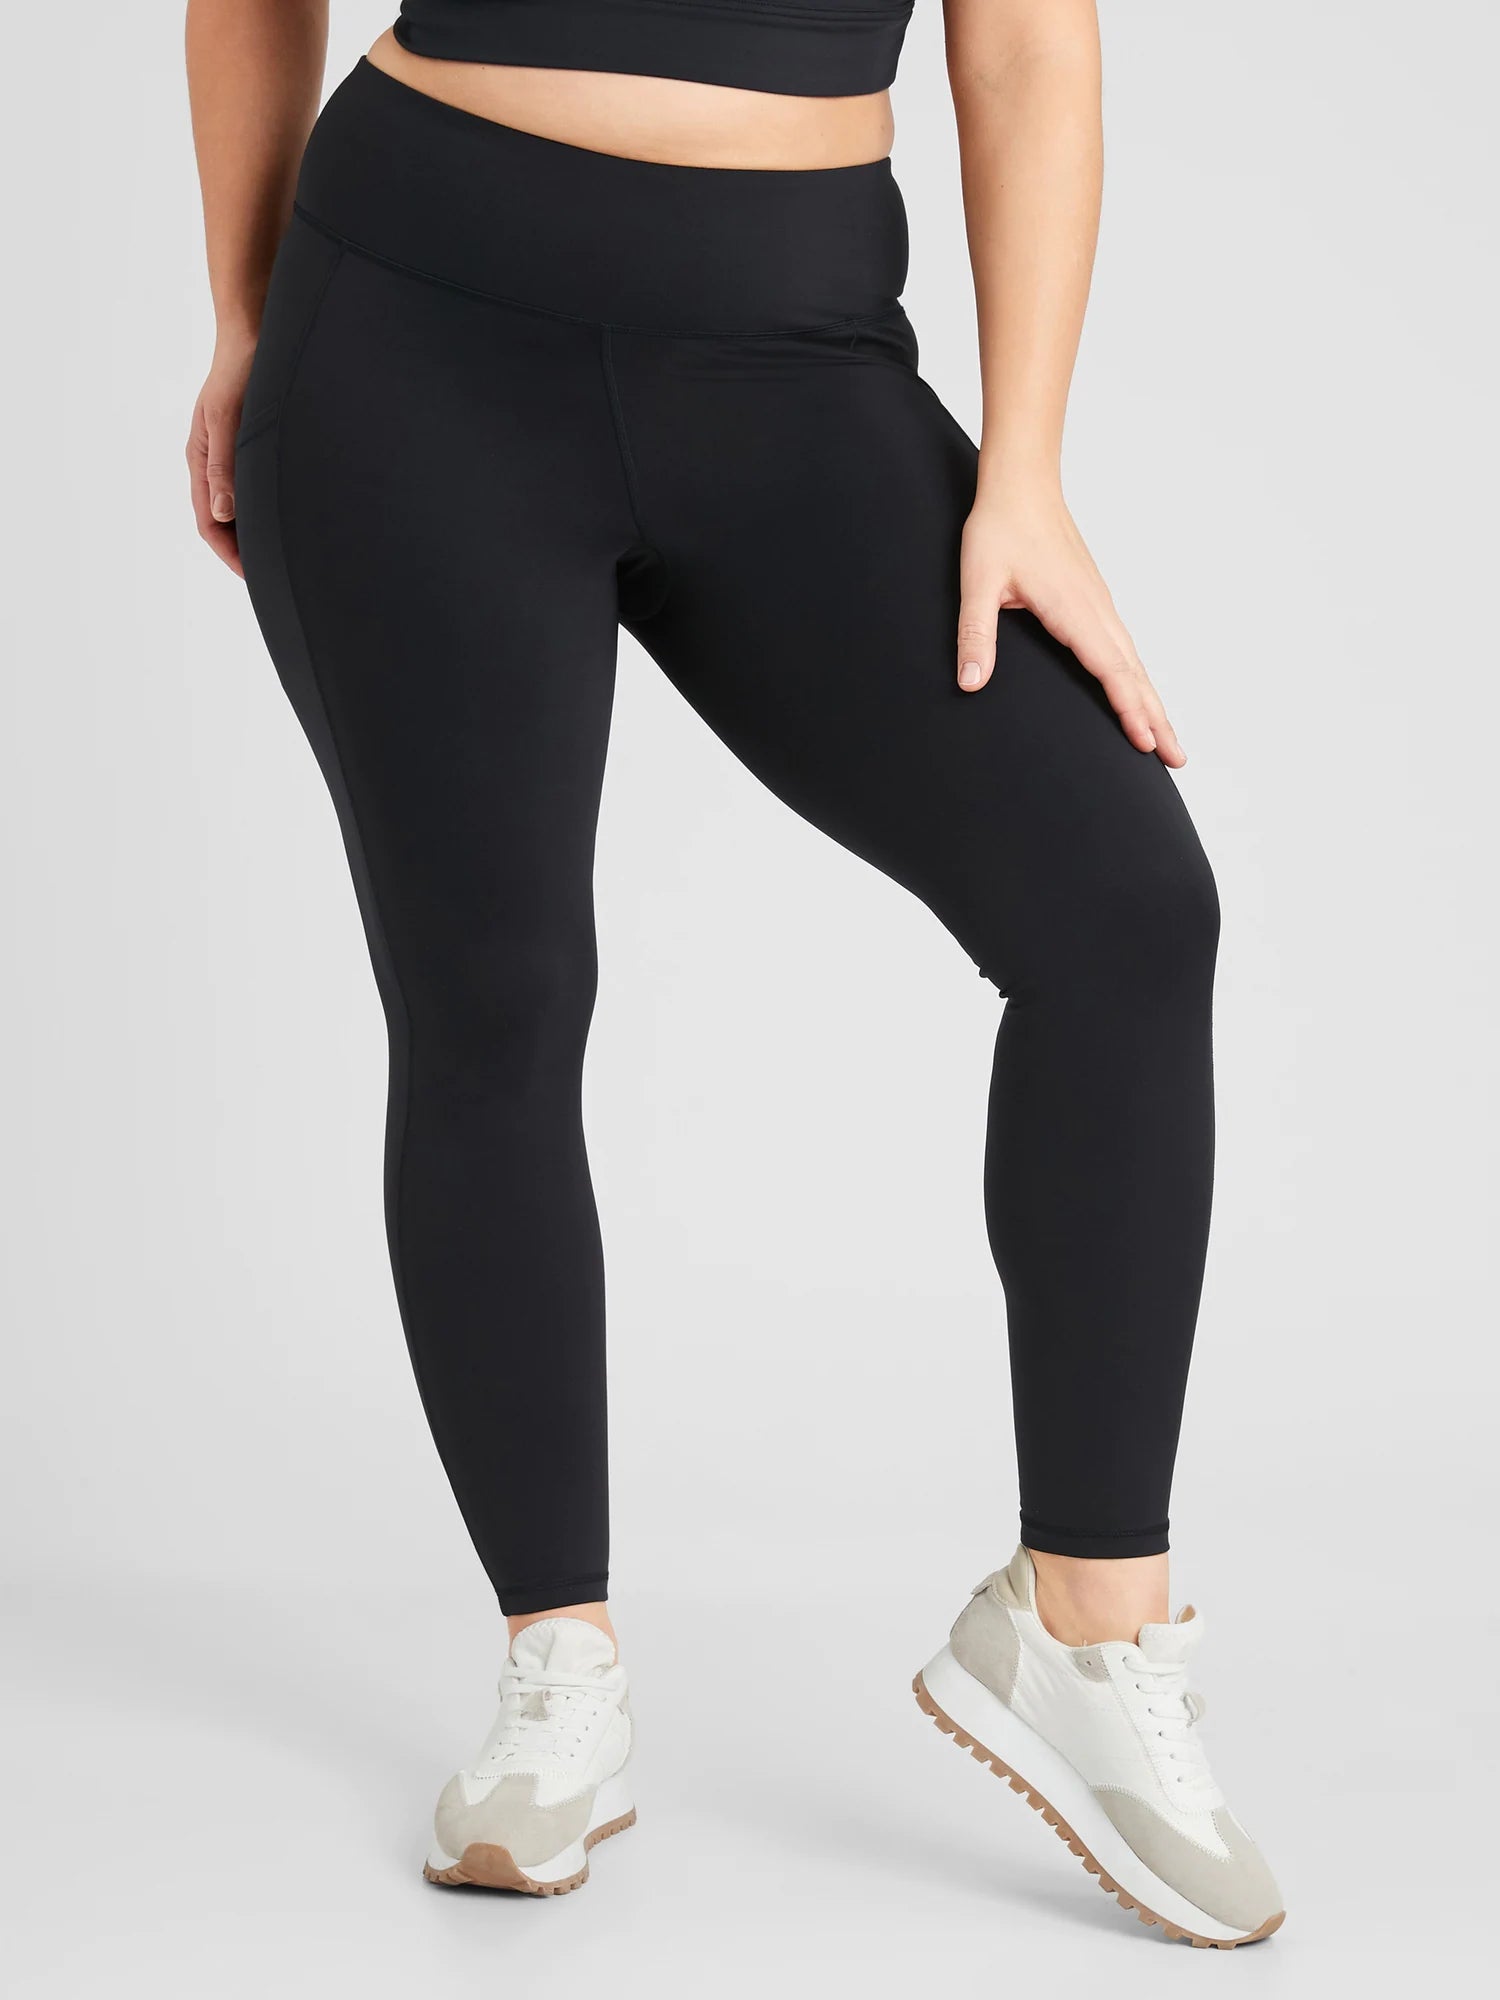 37 Best Black Leggings Of 2022 According To The Reviews